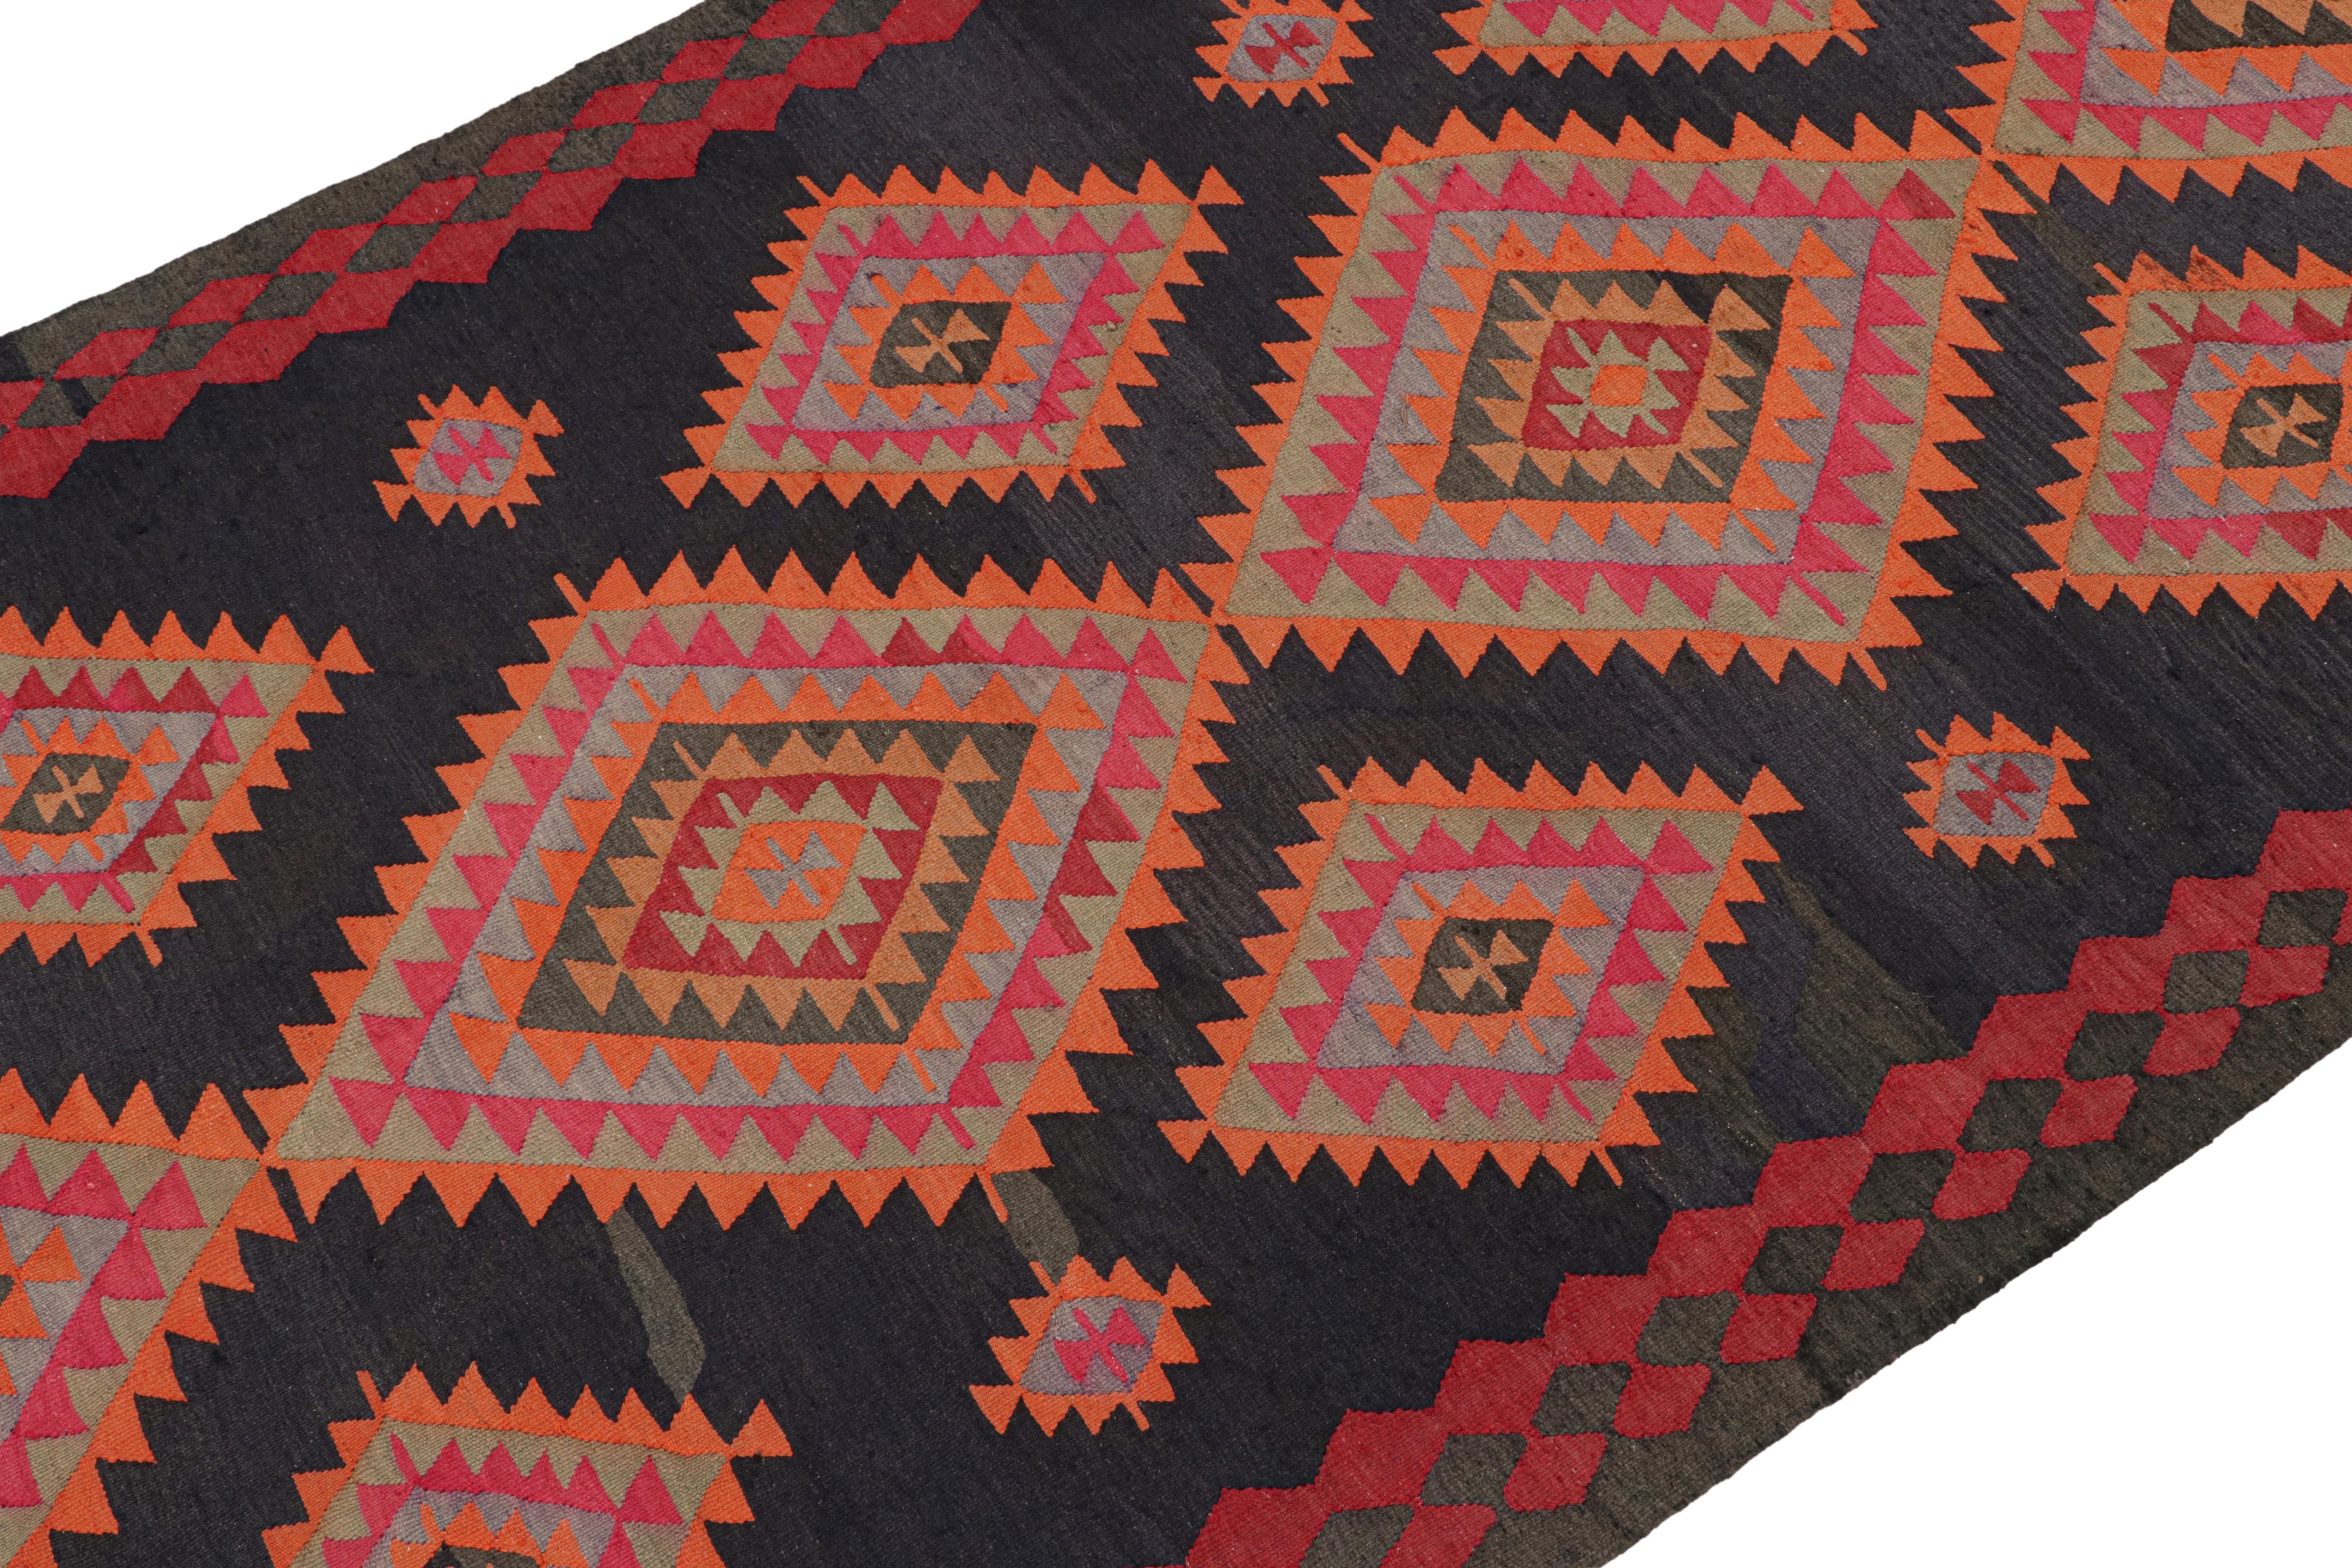 This vintage 6x13 Persian Kilim is a tribal rug from Meshkin—a small northwestern village known for its fabulous works. Handwoven in wool, it originates circa 1950-1960.

On the Design:

The design enjoys vibrant medallions on a deep midnight